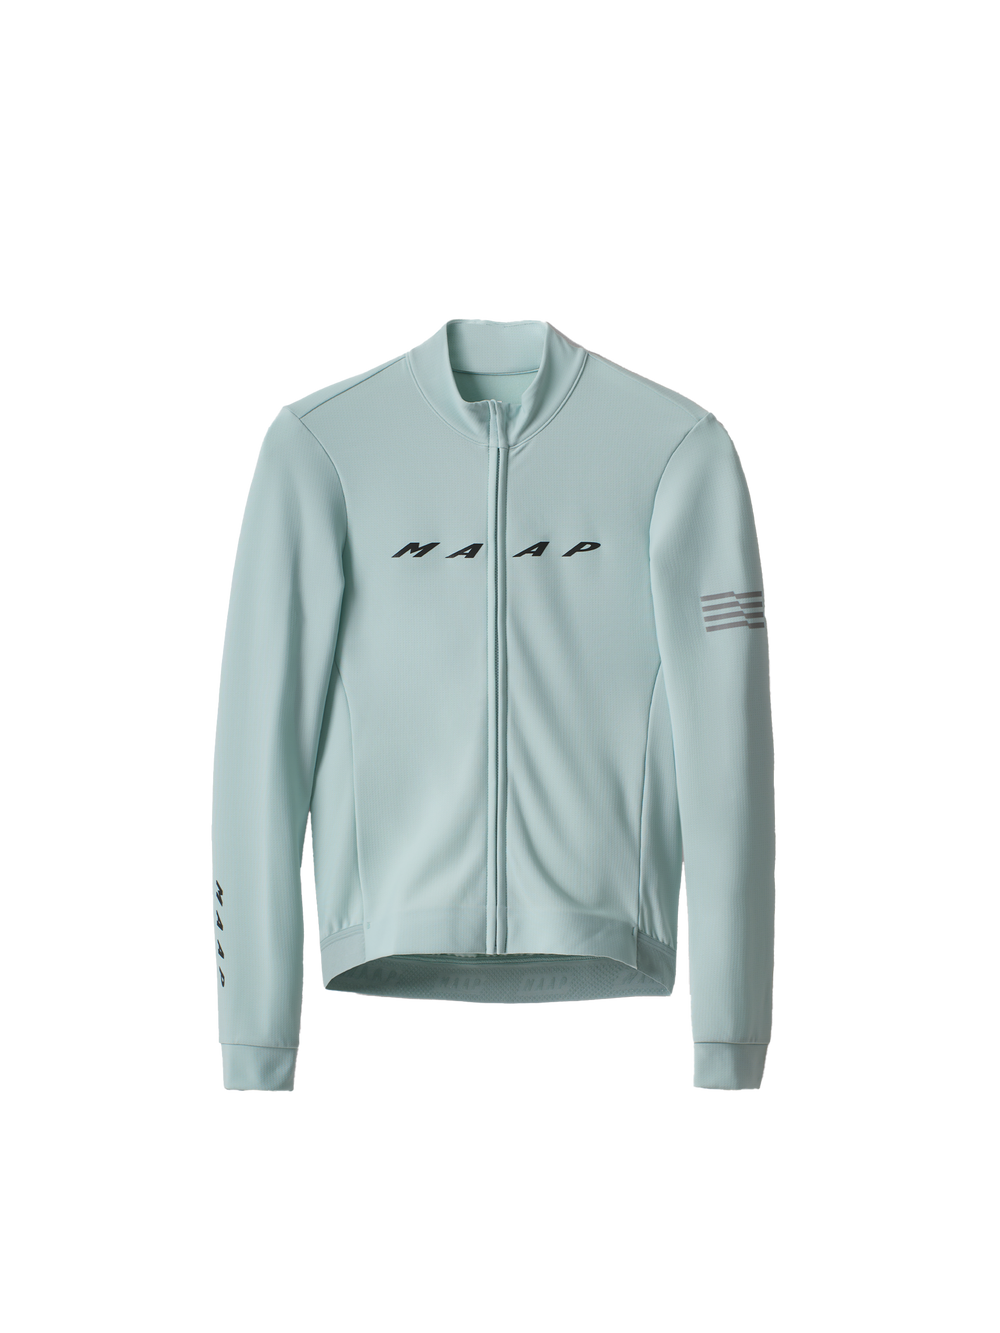 Product Image for Evade Thermal LS Jersey 2.0